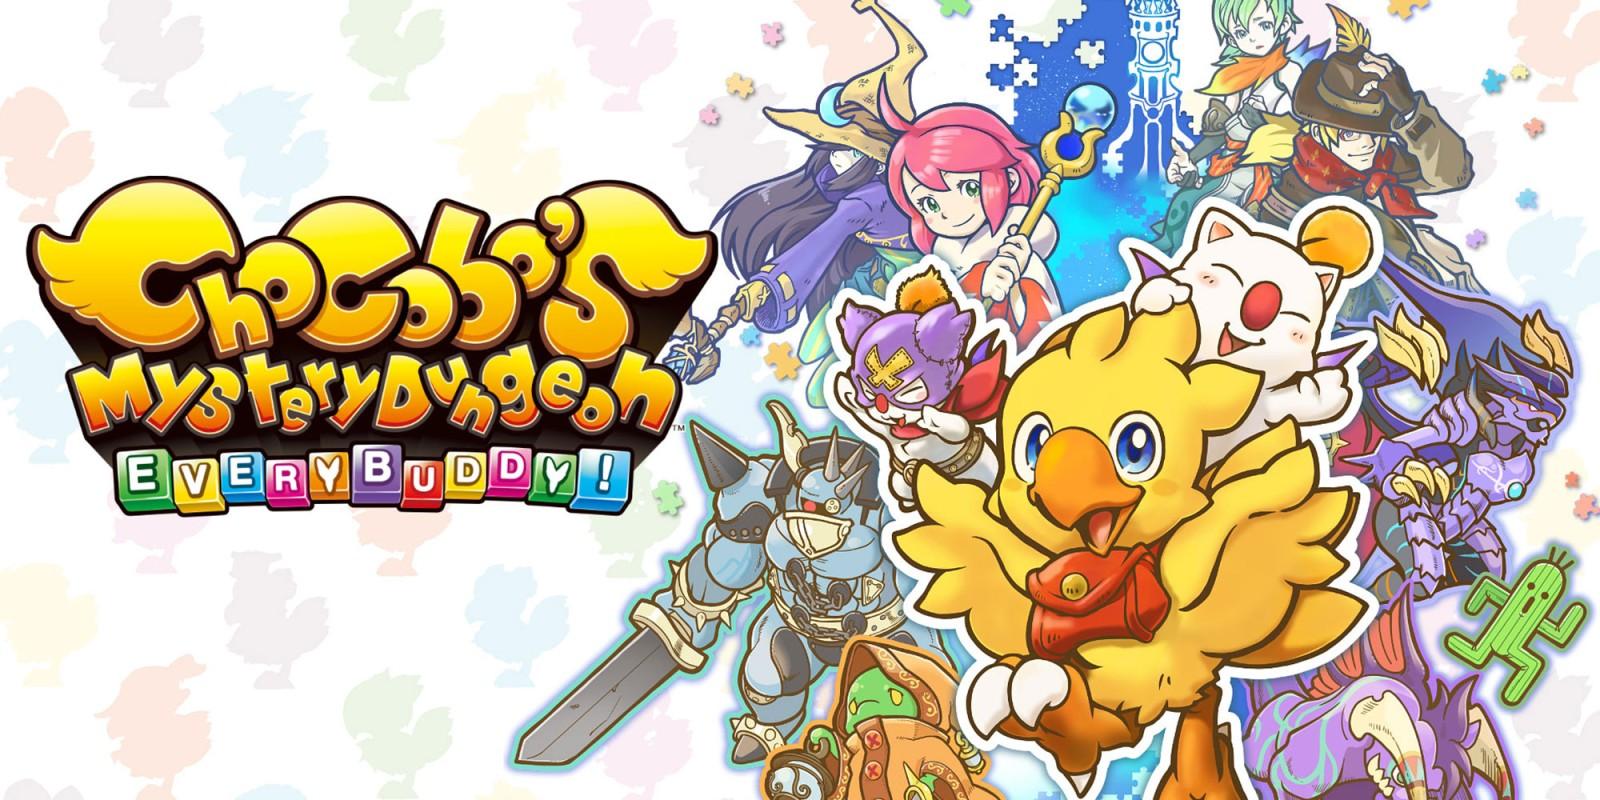 Chocobo's Mystery Dungeon EVERY BUDDY!. Nintendo Switch download